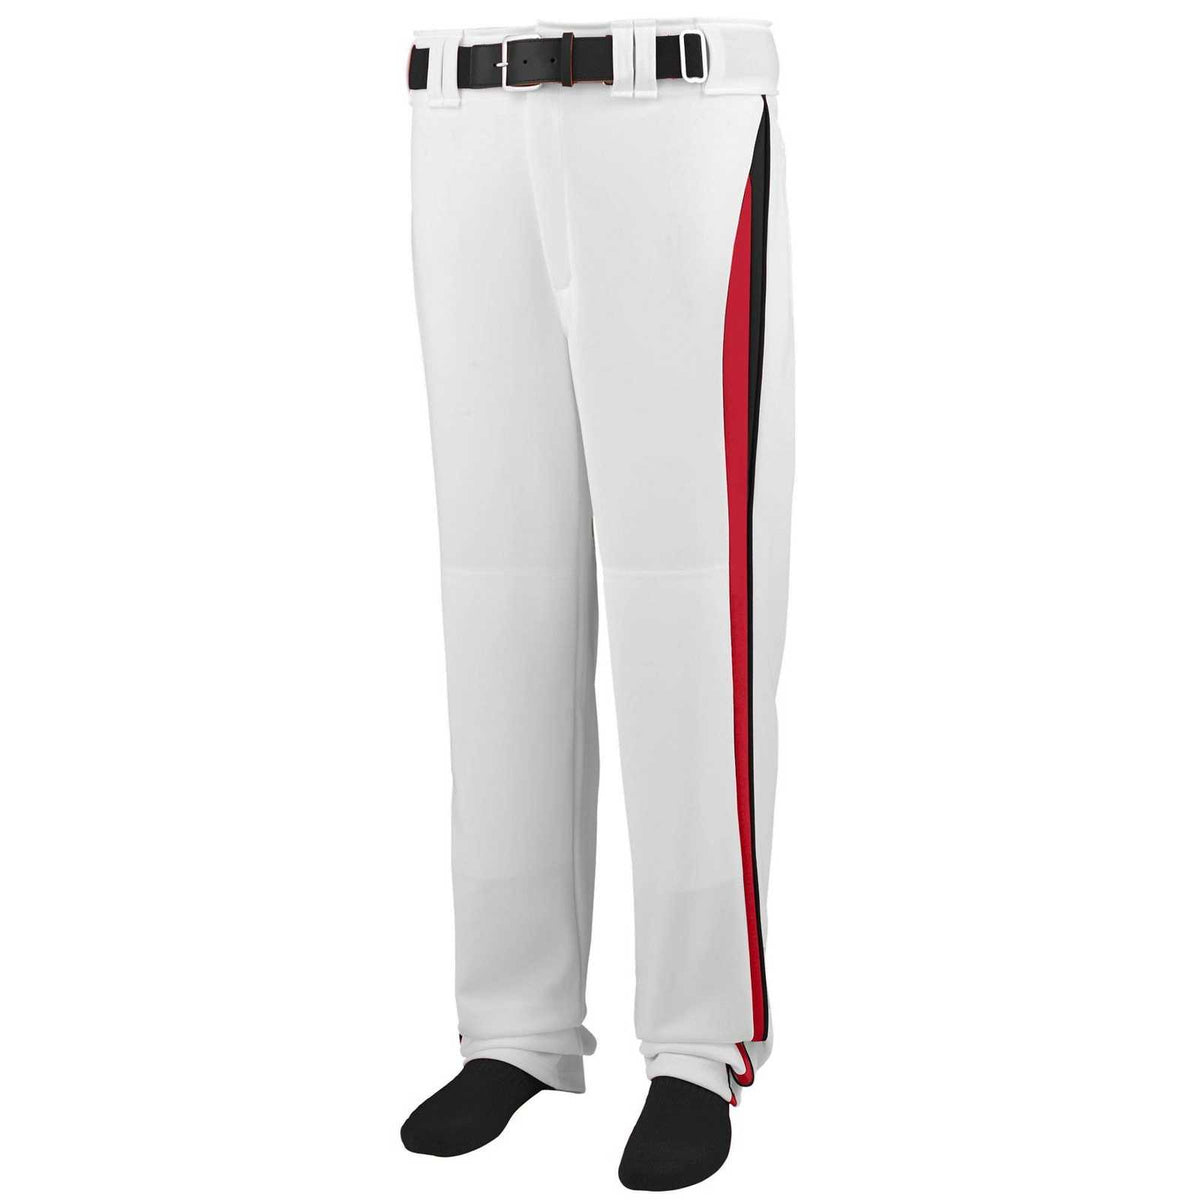 Augusta 1475 Line Drive Baseball Softball Pant - White Red Black - HIT a Double - 1